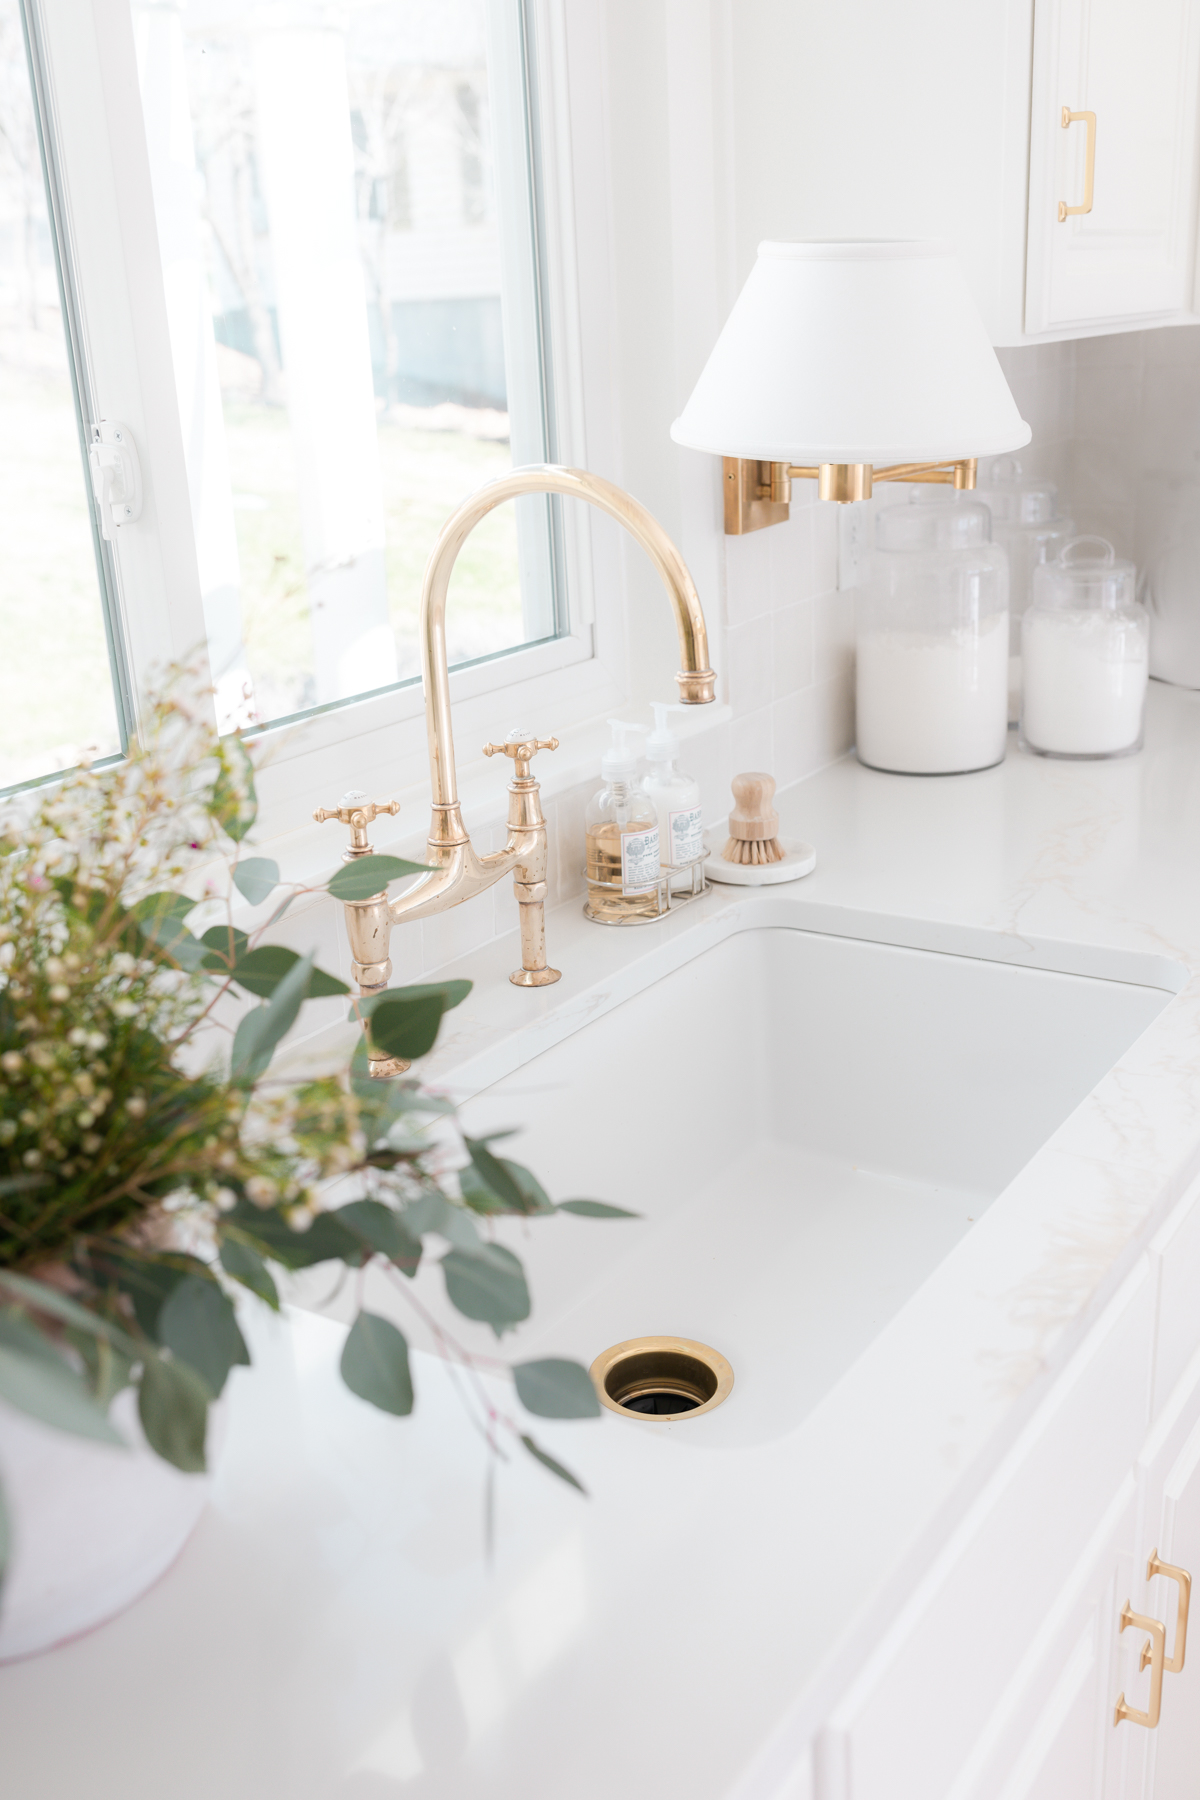 A sink with a gold faucet and a plant in front of a window, showcasing stylish kitchen organization.